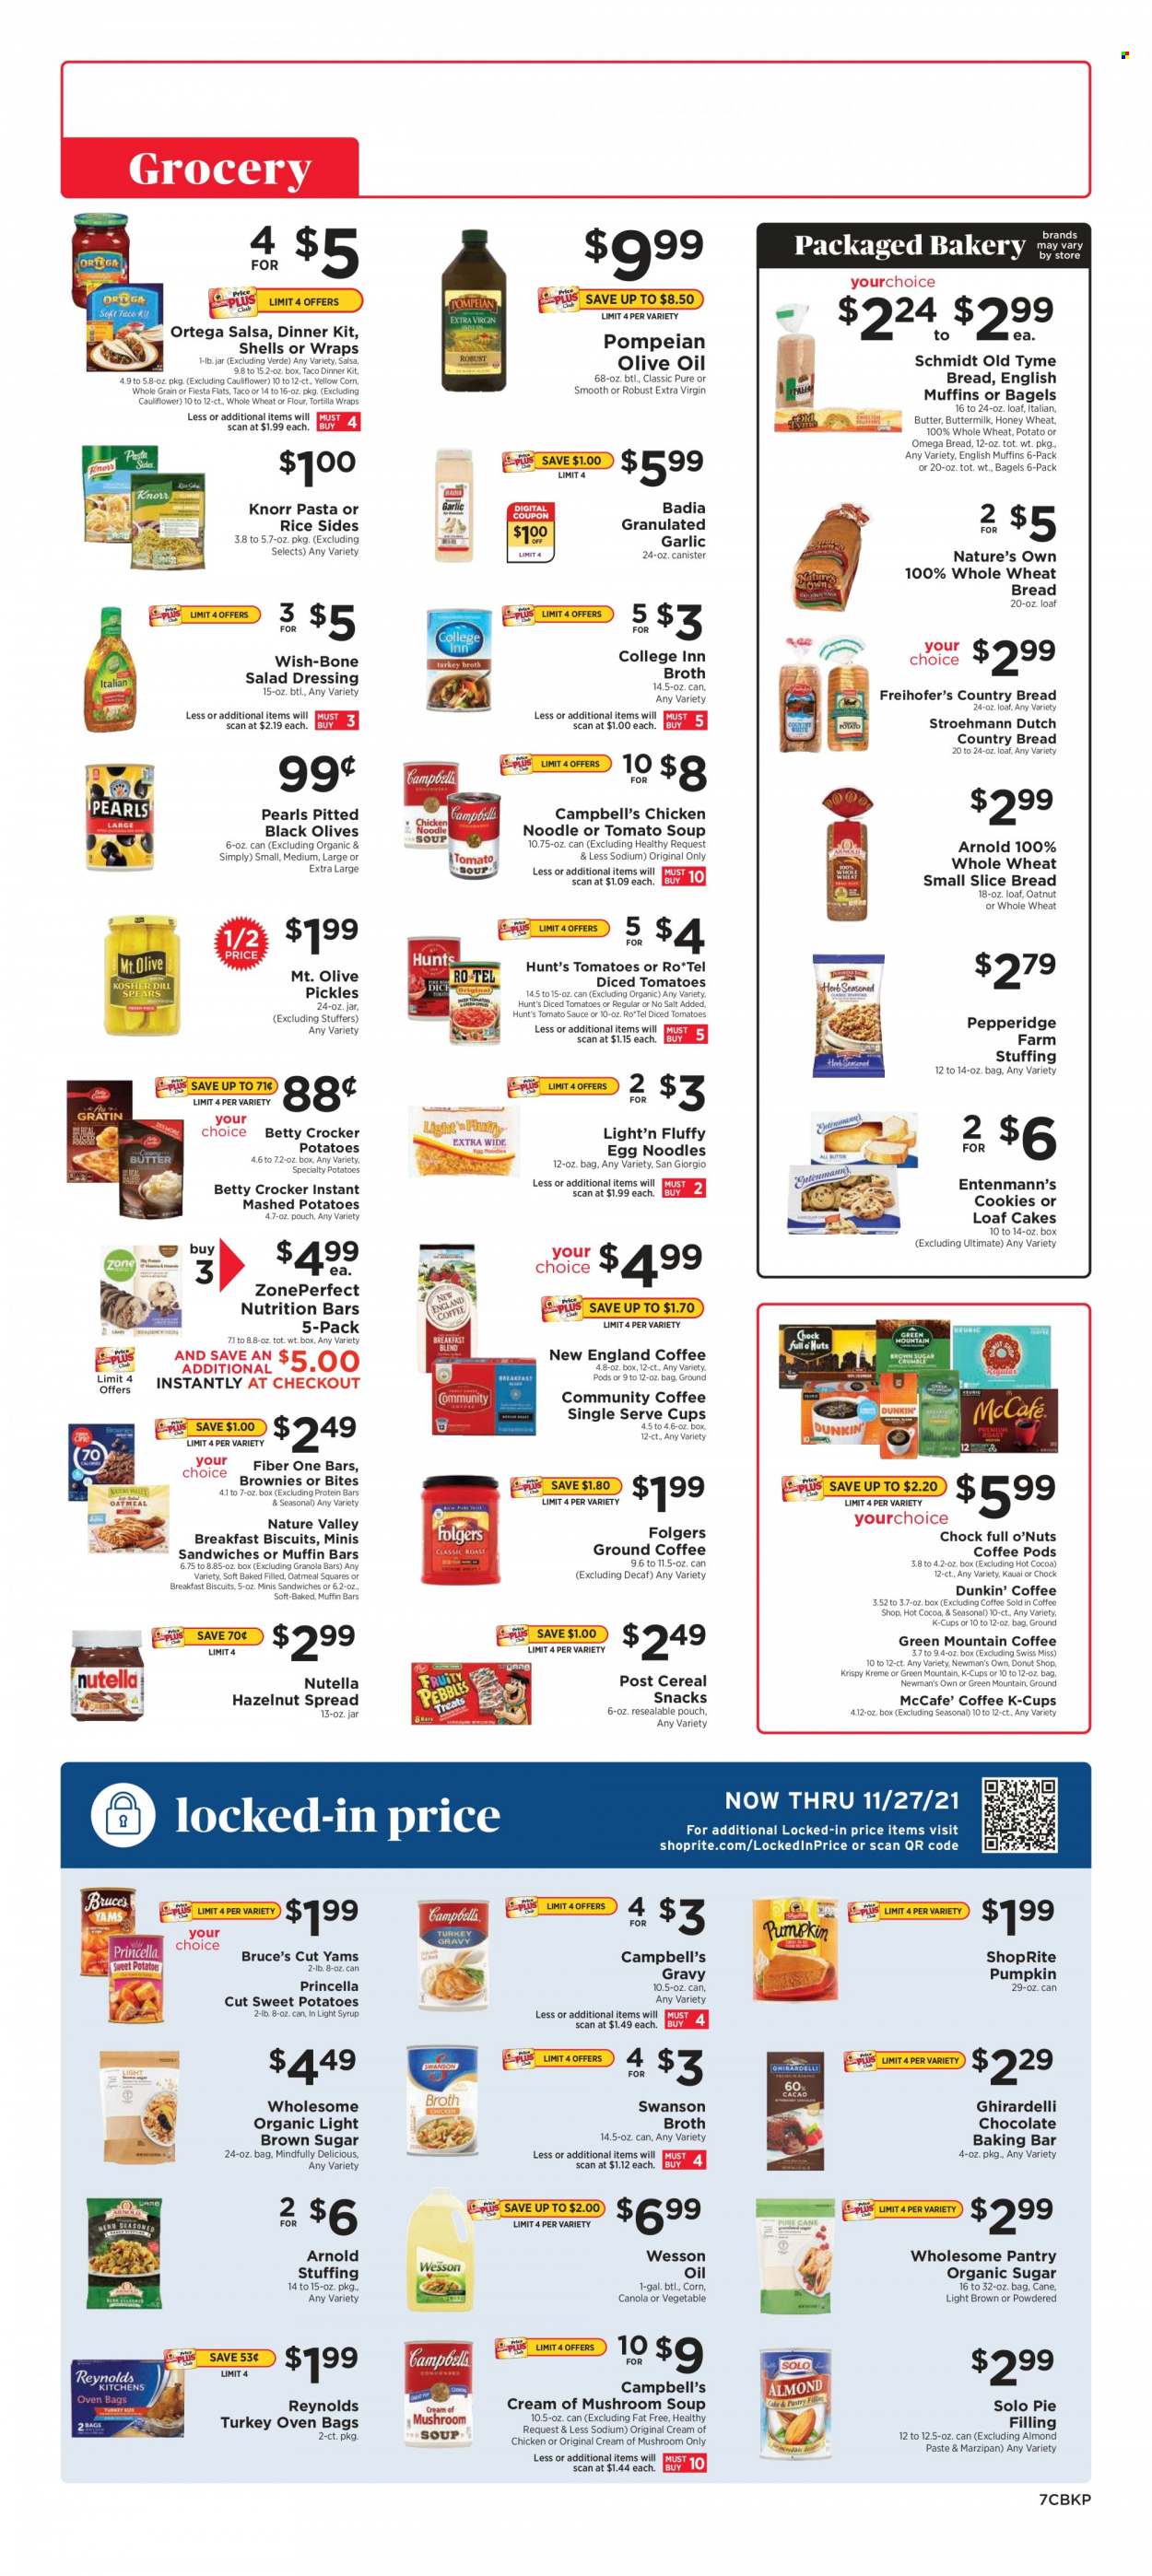 thumbnail - ShopRite Flyer - 11/21/2021 - 11/27/2021 - Sales products - bagels, tortillas, wheat bread, cake, wraps, brownies, Entenmann's, corn, garlic, sweet potato, tomatoes, pumpkin, Campbell's, mashed potatoes, mushroom soup, tomato soup, soup, Knorr, dinner kit, noodles, Swiss Miss, buttermilk, cookies, Nutella, chocolate, snack, biscuit, Ghirardelli, marzipan, pie filling, oatmeal, broth, tomato sauce, pickles, olives, Badia, cereals, nutrition bar, protein bar, granola bar, Nature Valley, Fiber One, rice, egg noodles, almond paste, salad dressing, dressing, salsa, extra virgin olive oil, olive oil, oil, syrup, hazelnut spread, hot cocoa, Folgers, coffee capsules, McCafe, K-Cups, Green Mountain, Nature's Own. Page 7.